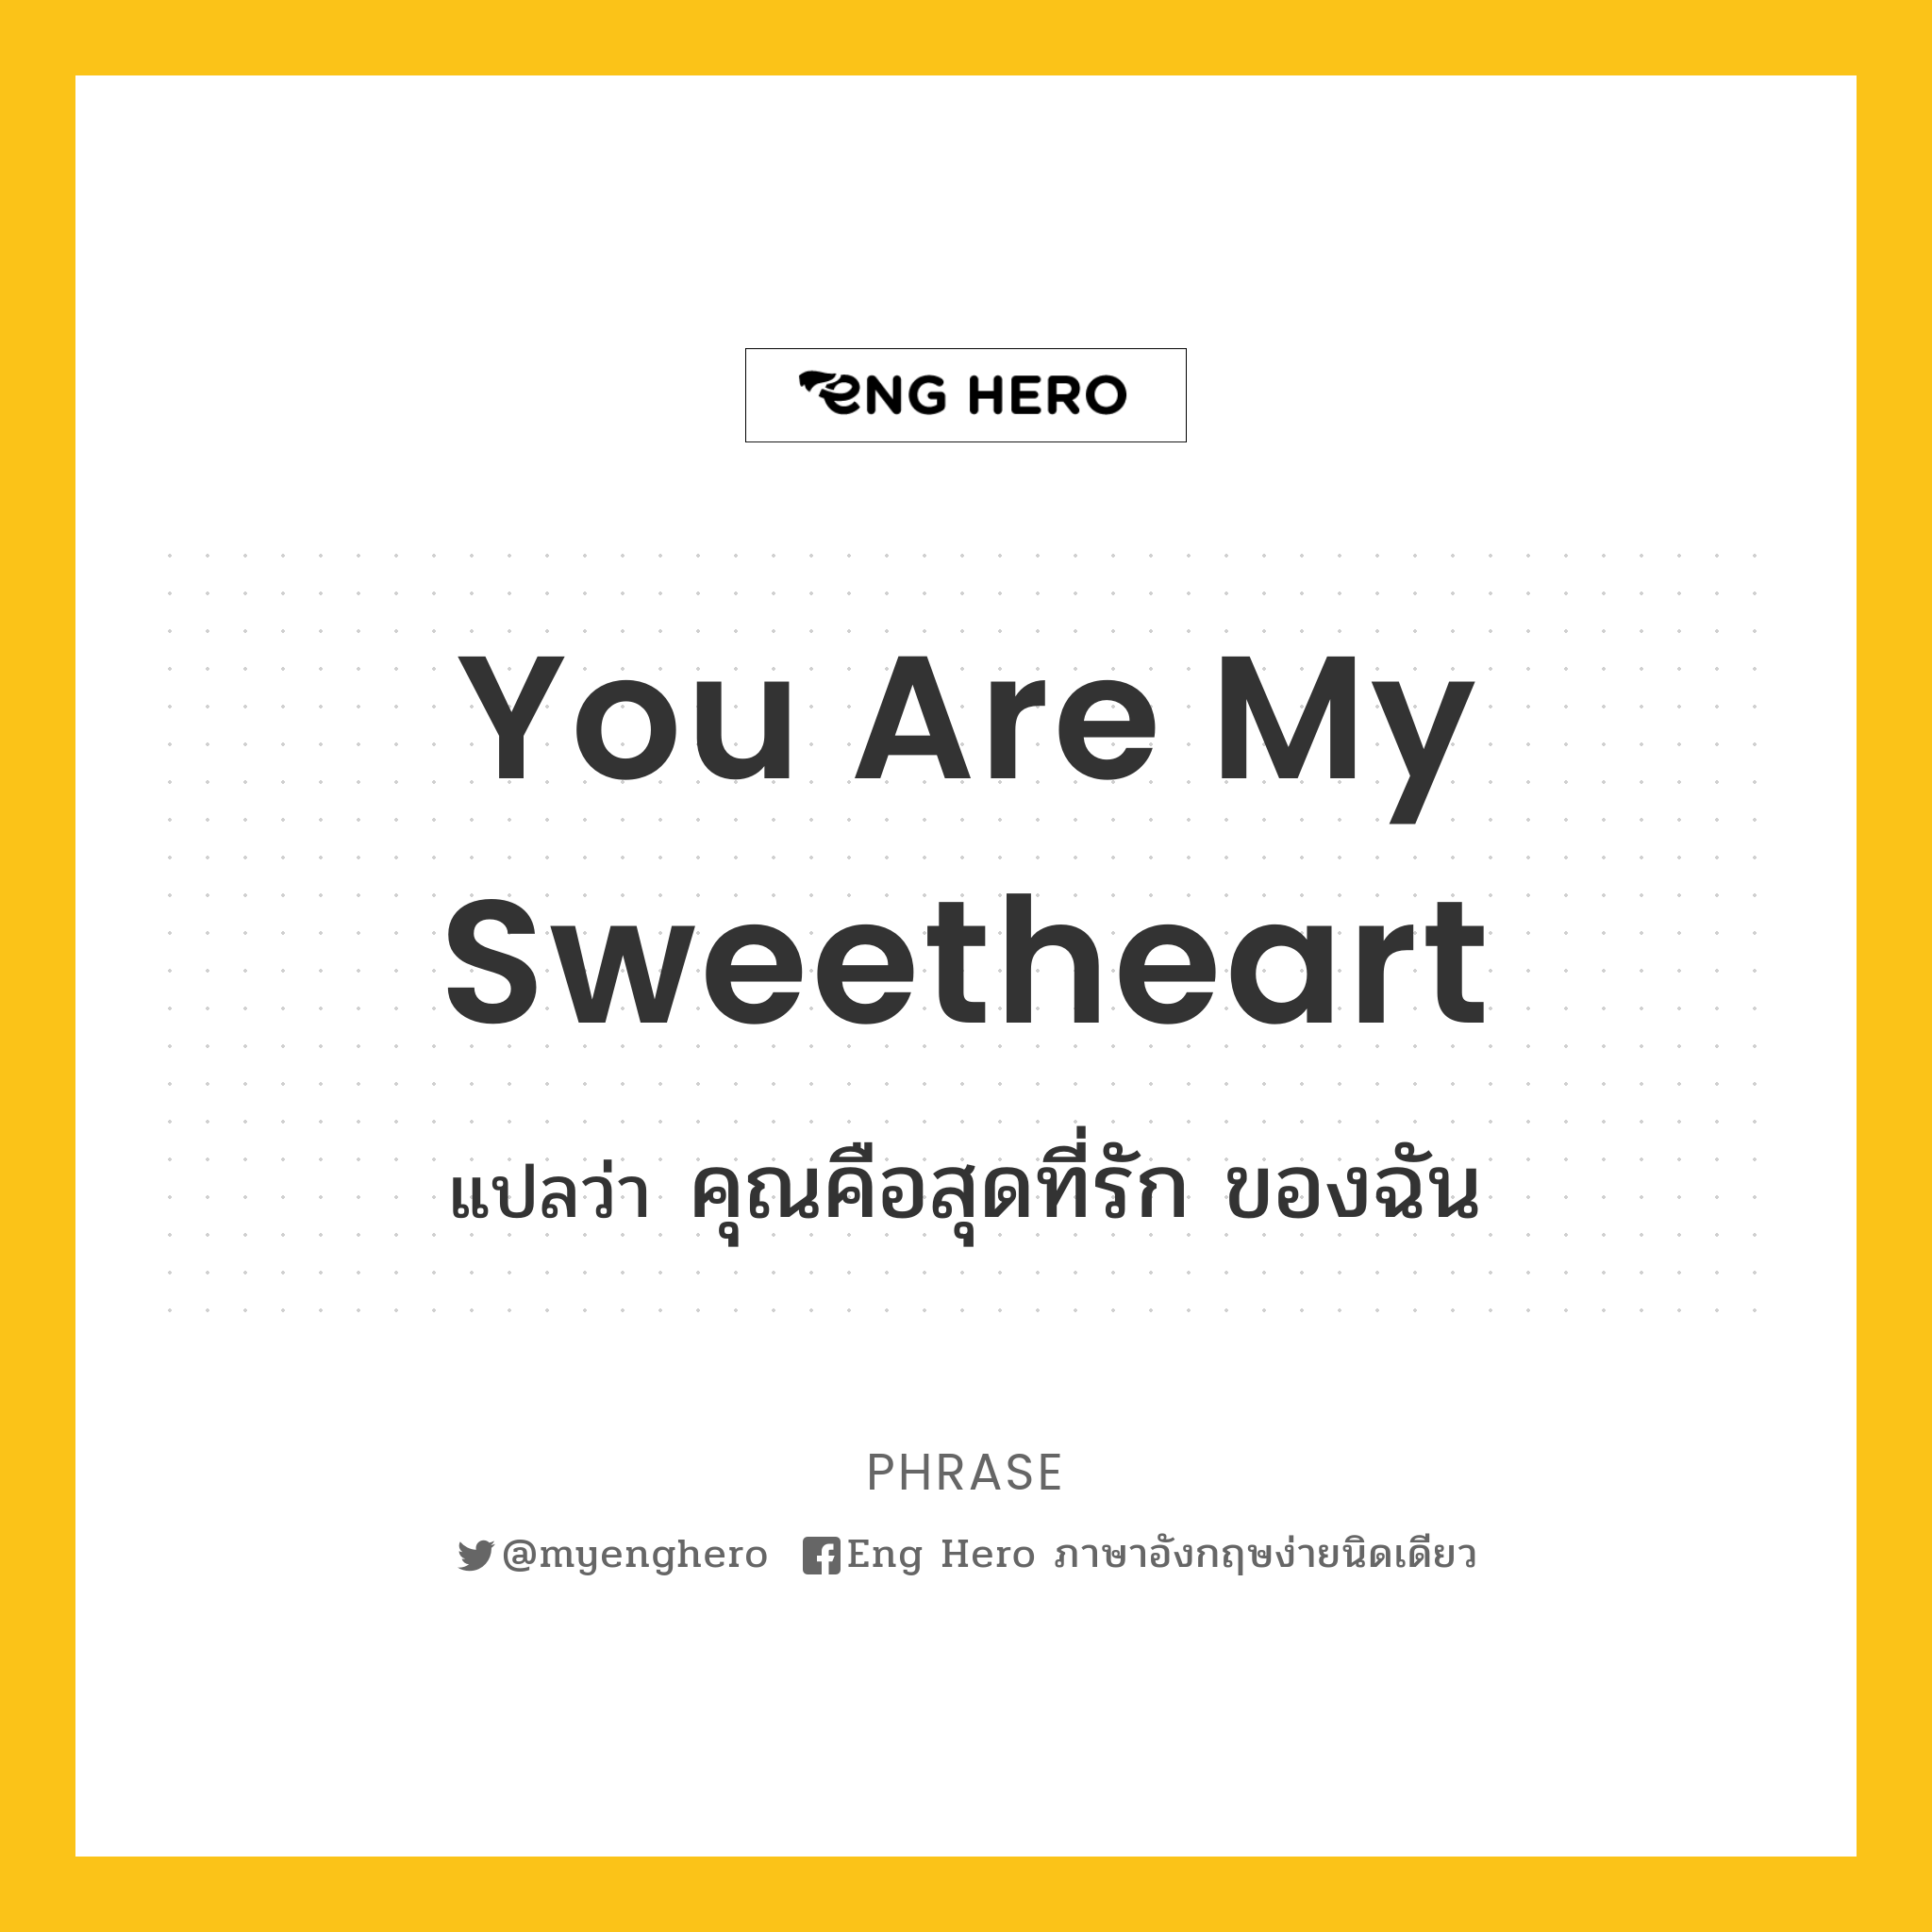 You are my sweetheart